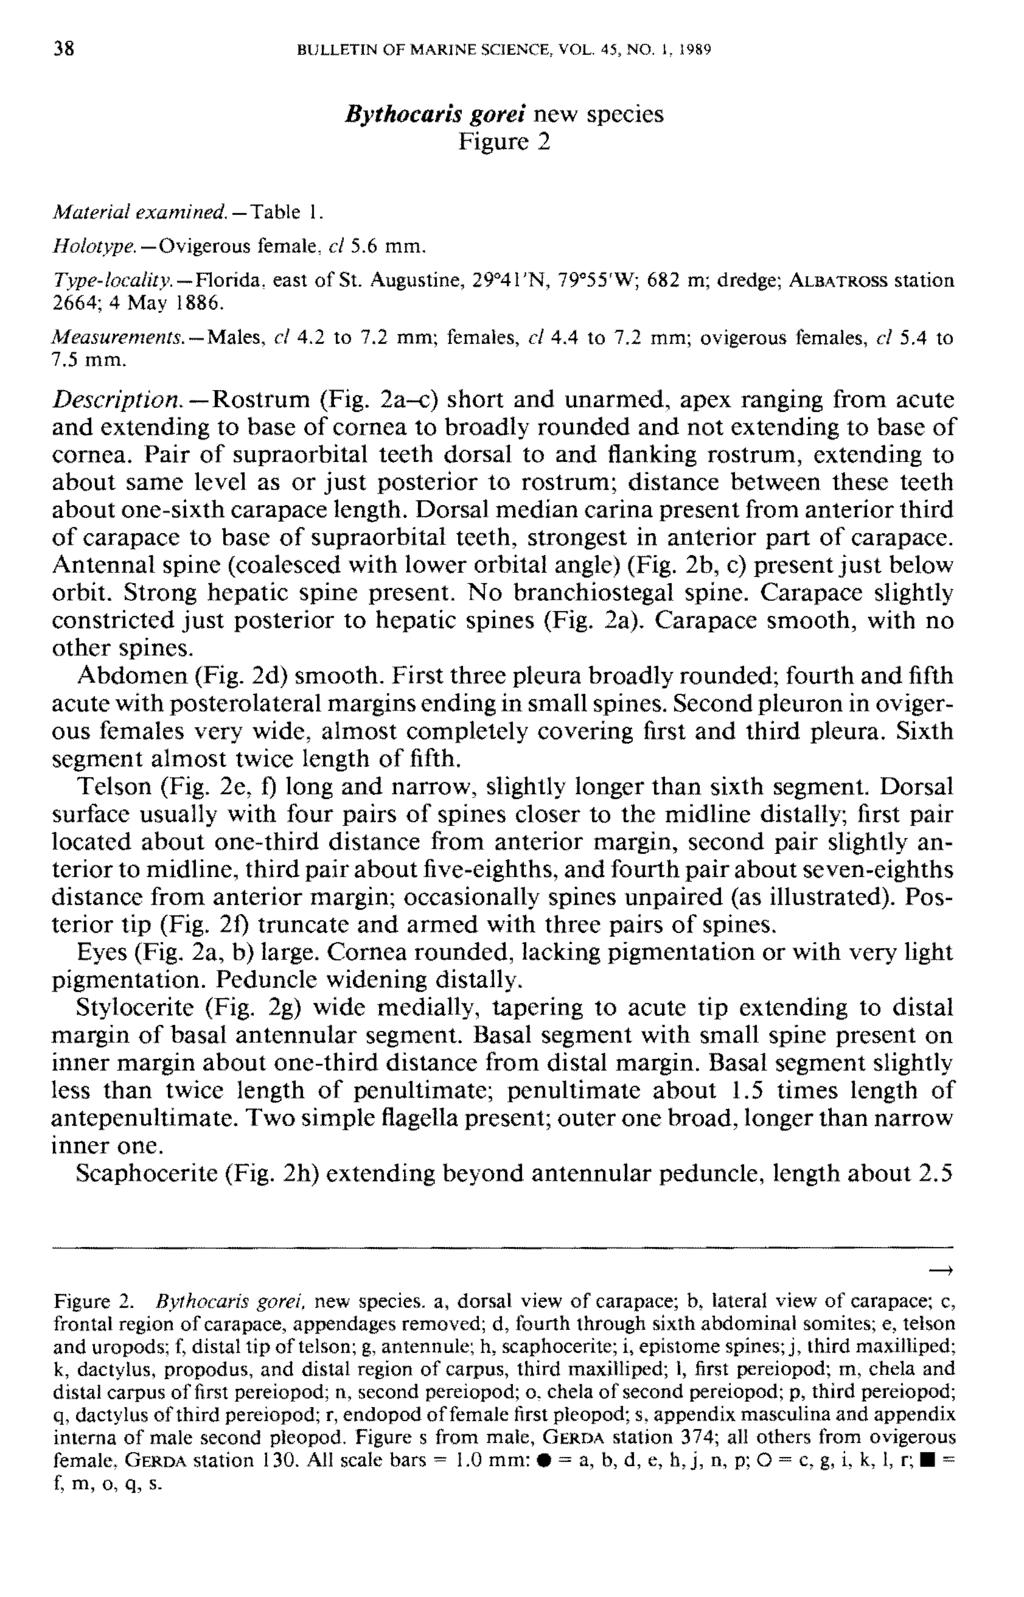 38 BULLETIN OF MARINE SCIENCE, VOL. 45, NO. 1, 1989 Bythocaris gomi new species Figure 2 Material examined. TiMt 1. /fotevpe. Ovigerous female, d 5.6 mm. Type-localitv. \ondz. east of St.